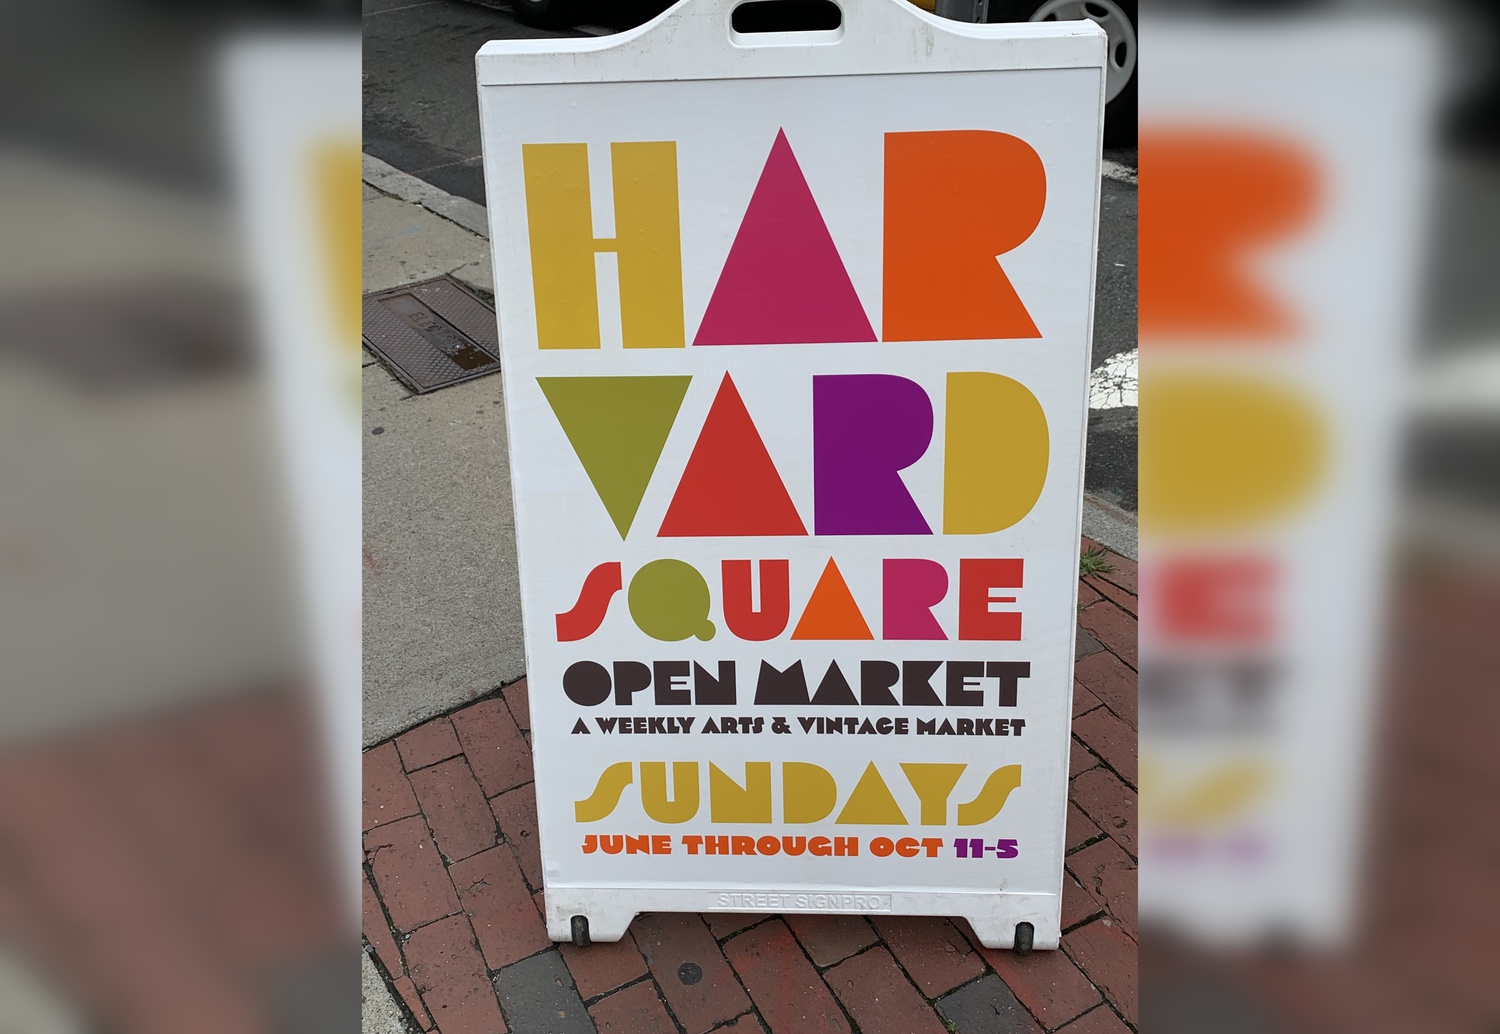 The Harvard Square Open Market sign greets visitors as they enter the market.